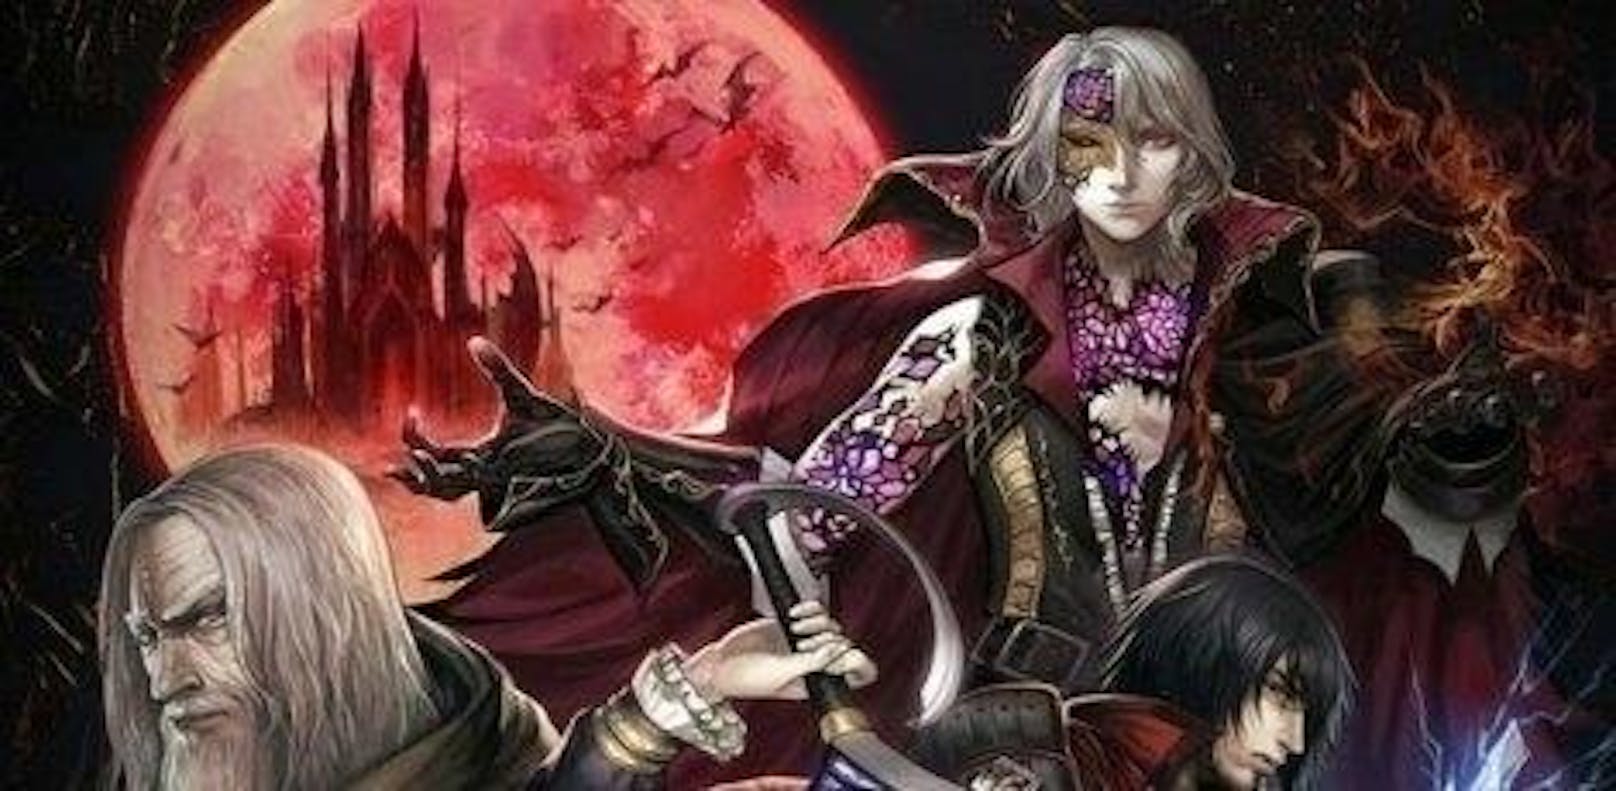  <a href="https://www.heute.at/digital/games/story/Bloodstained-Ritual-of-the-Night-Kein-offizieller-Nachfolger--aber-fast-wie--Castlevania--58266964" target="_blank">Bloodstained: Ritual of the Night</a>